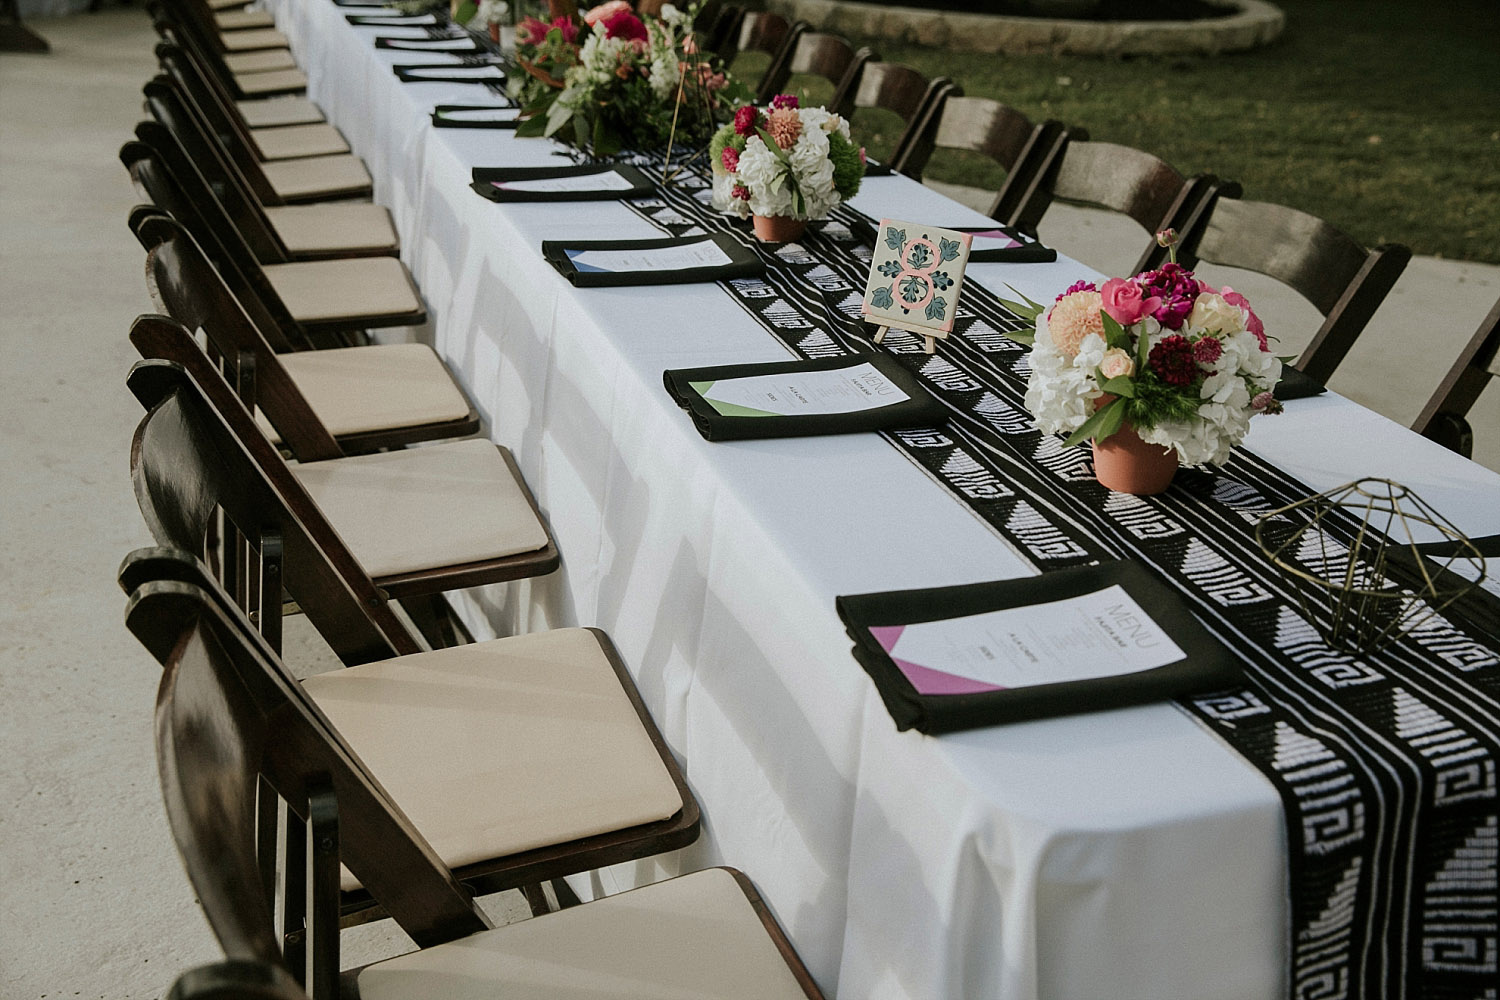 Modern mexicana head table with a black and white mexican pattern runner